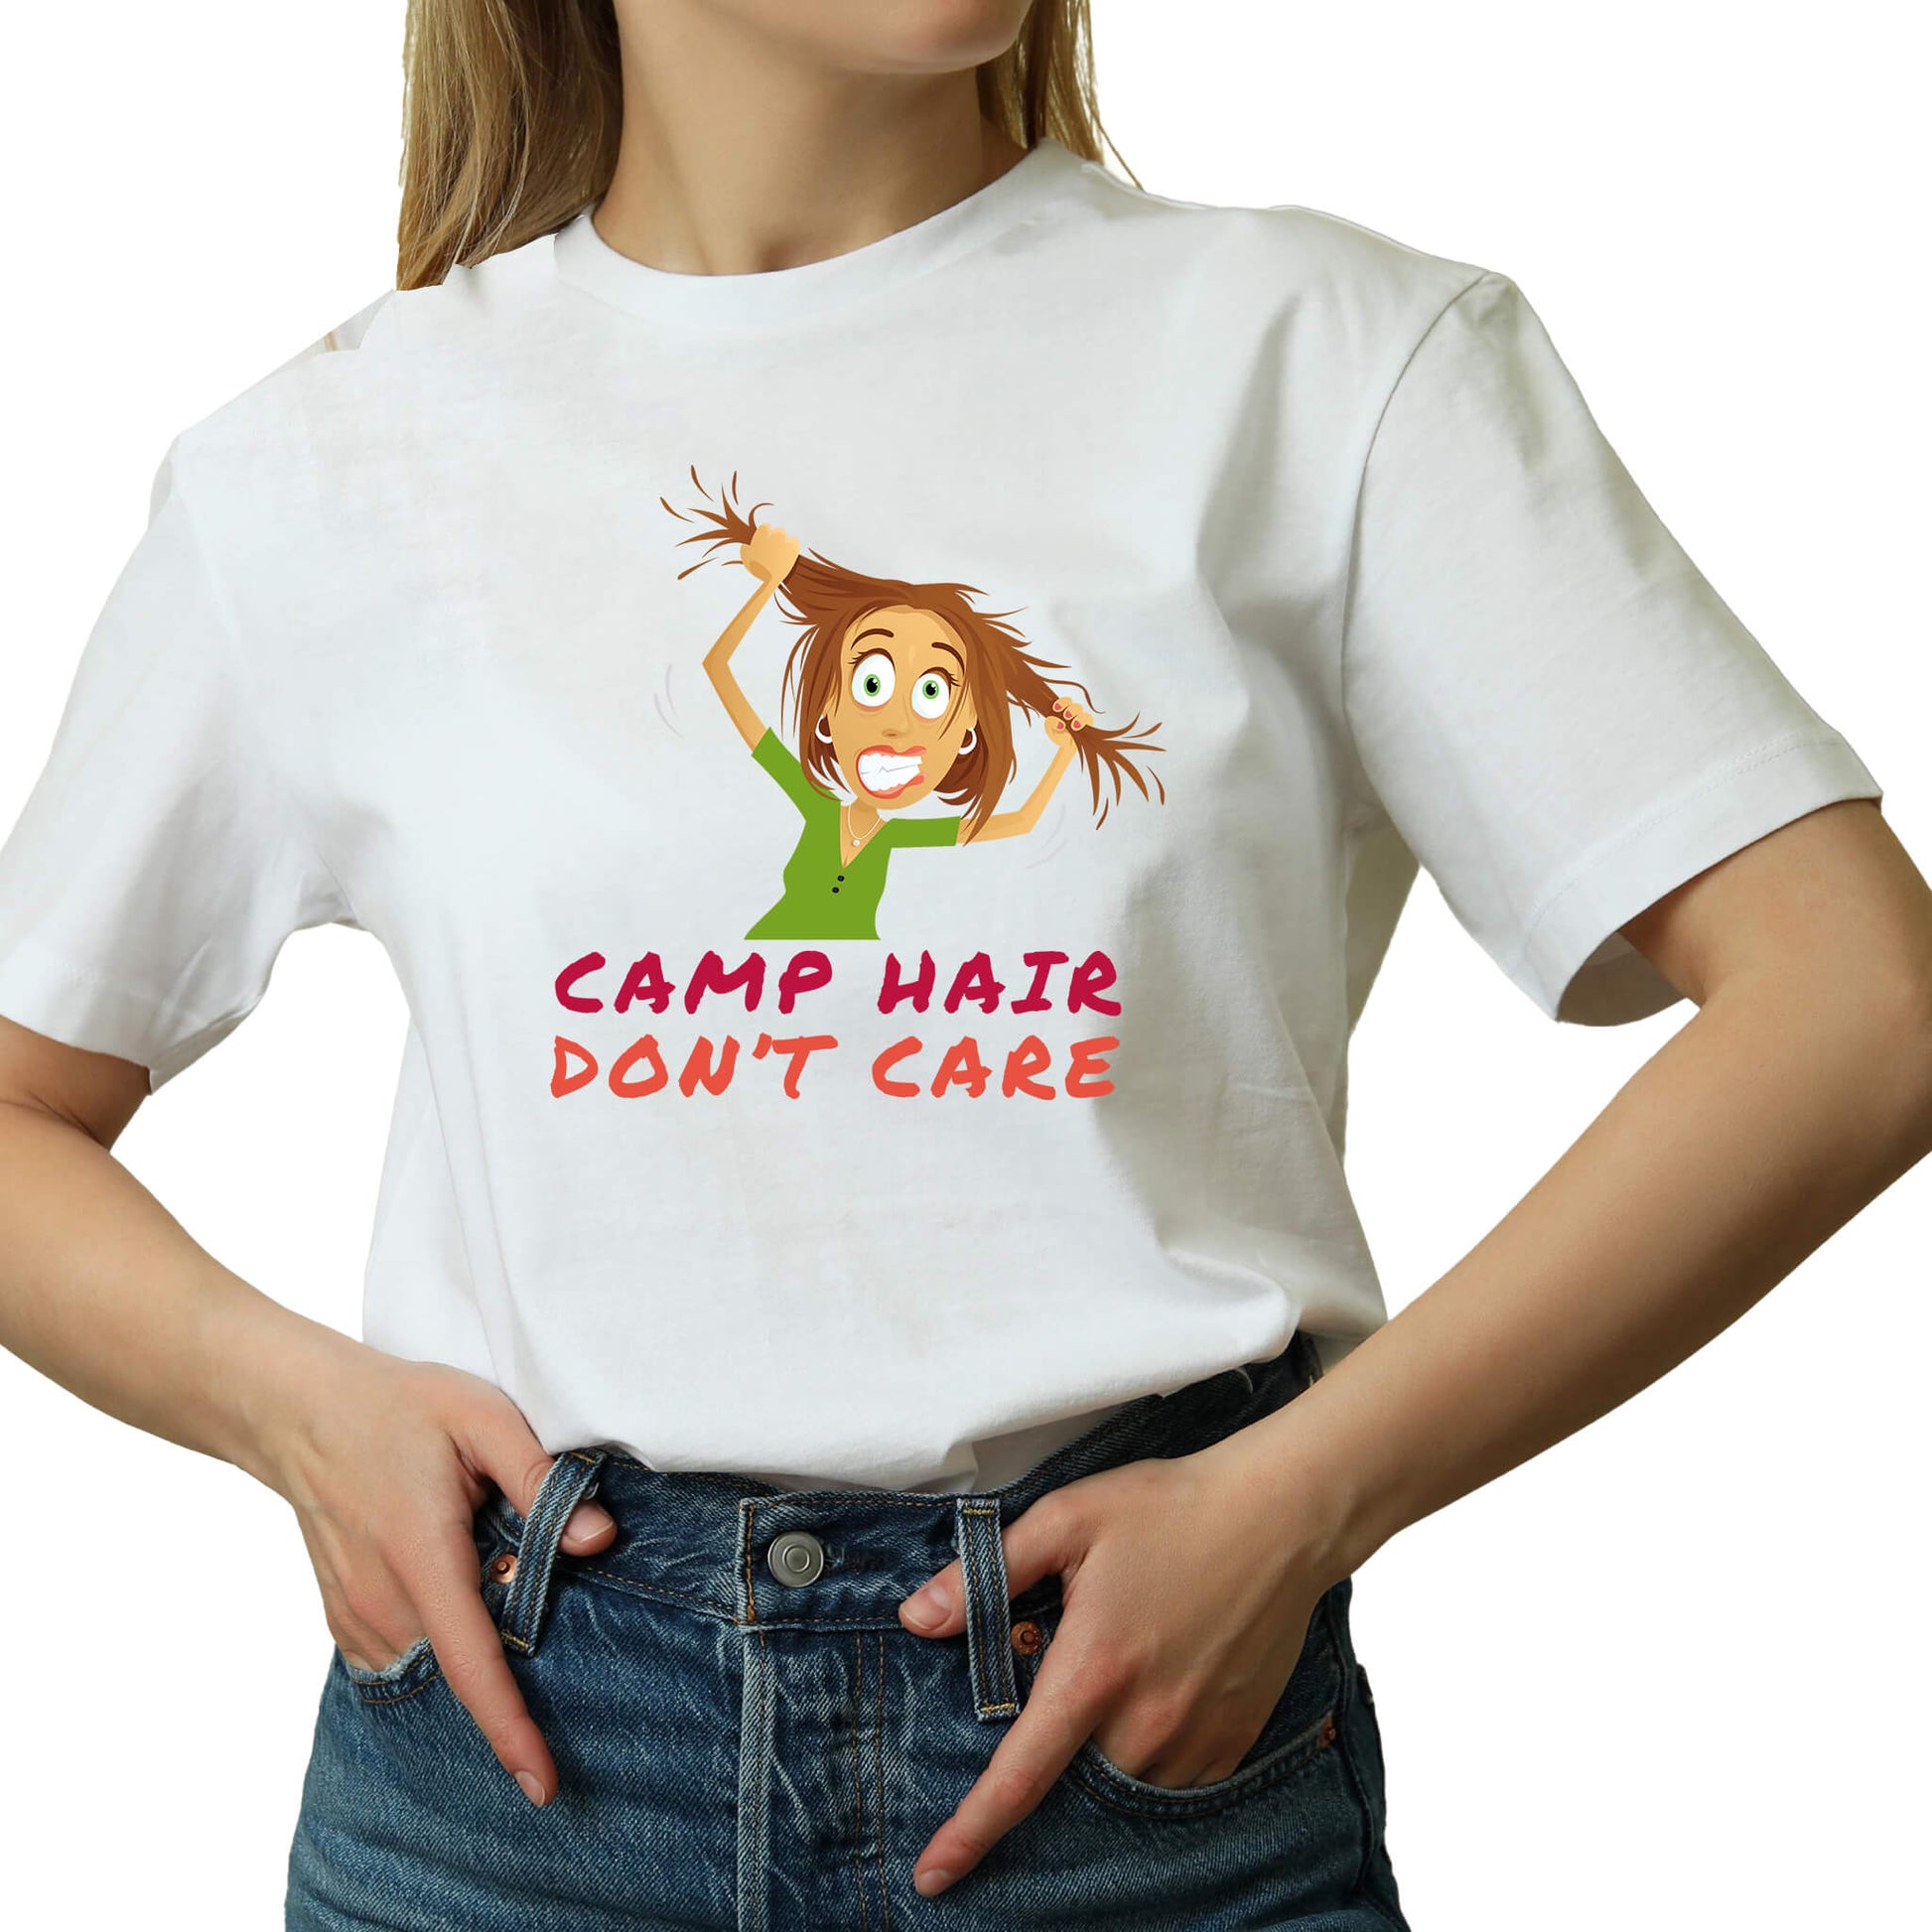 Embrace the Wild with our "Camp Hair Don't Care" Graphic T-Shirt - Your Go-To Outdoors Companion!